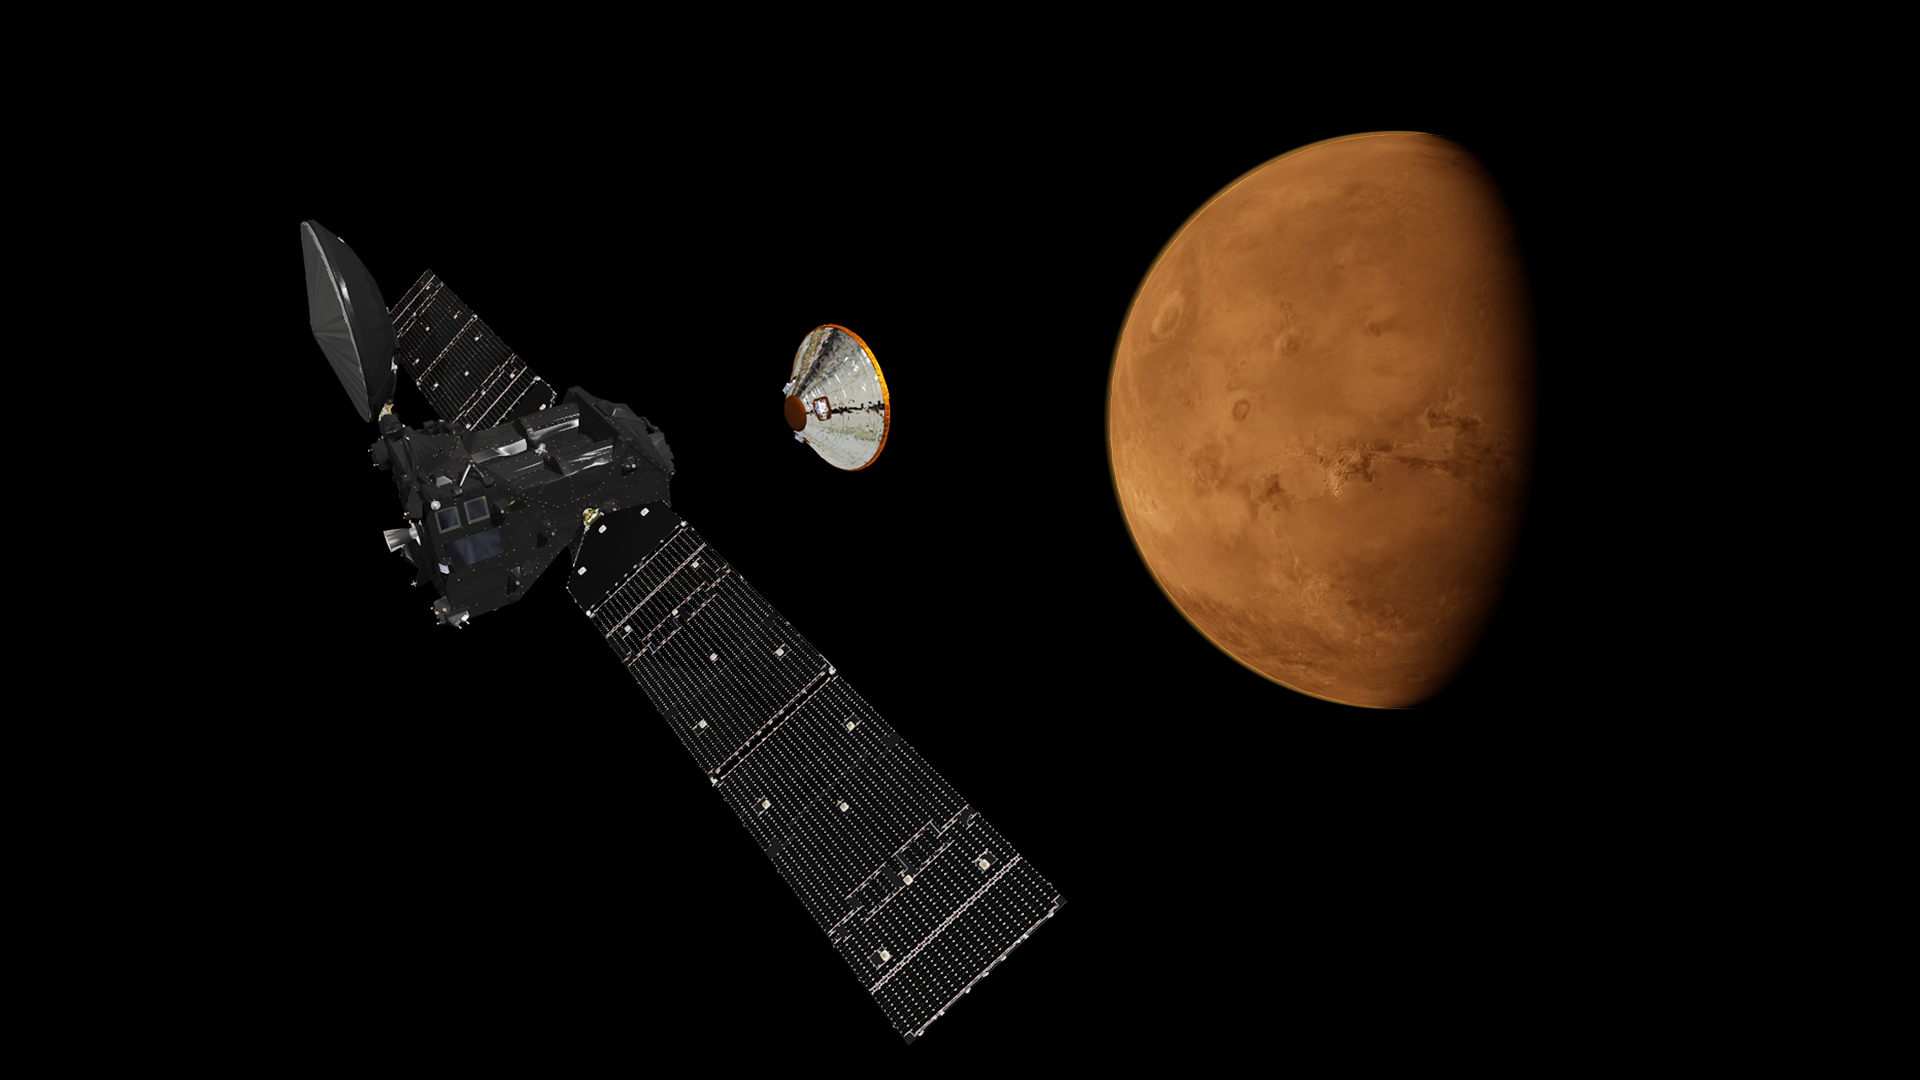 Artist's impression depicting the separation of the ExoMars 2016 entry, descent and landing demonstrator module, named Schiaparelli, from the Trace Gas Orbiter, and heading for Mars. Copyright: ESA/ATG medialab  